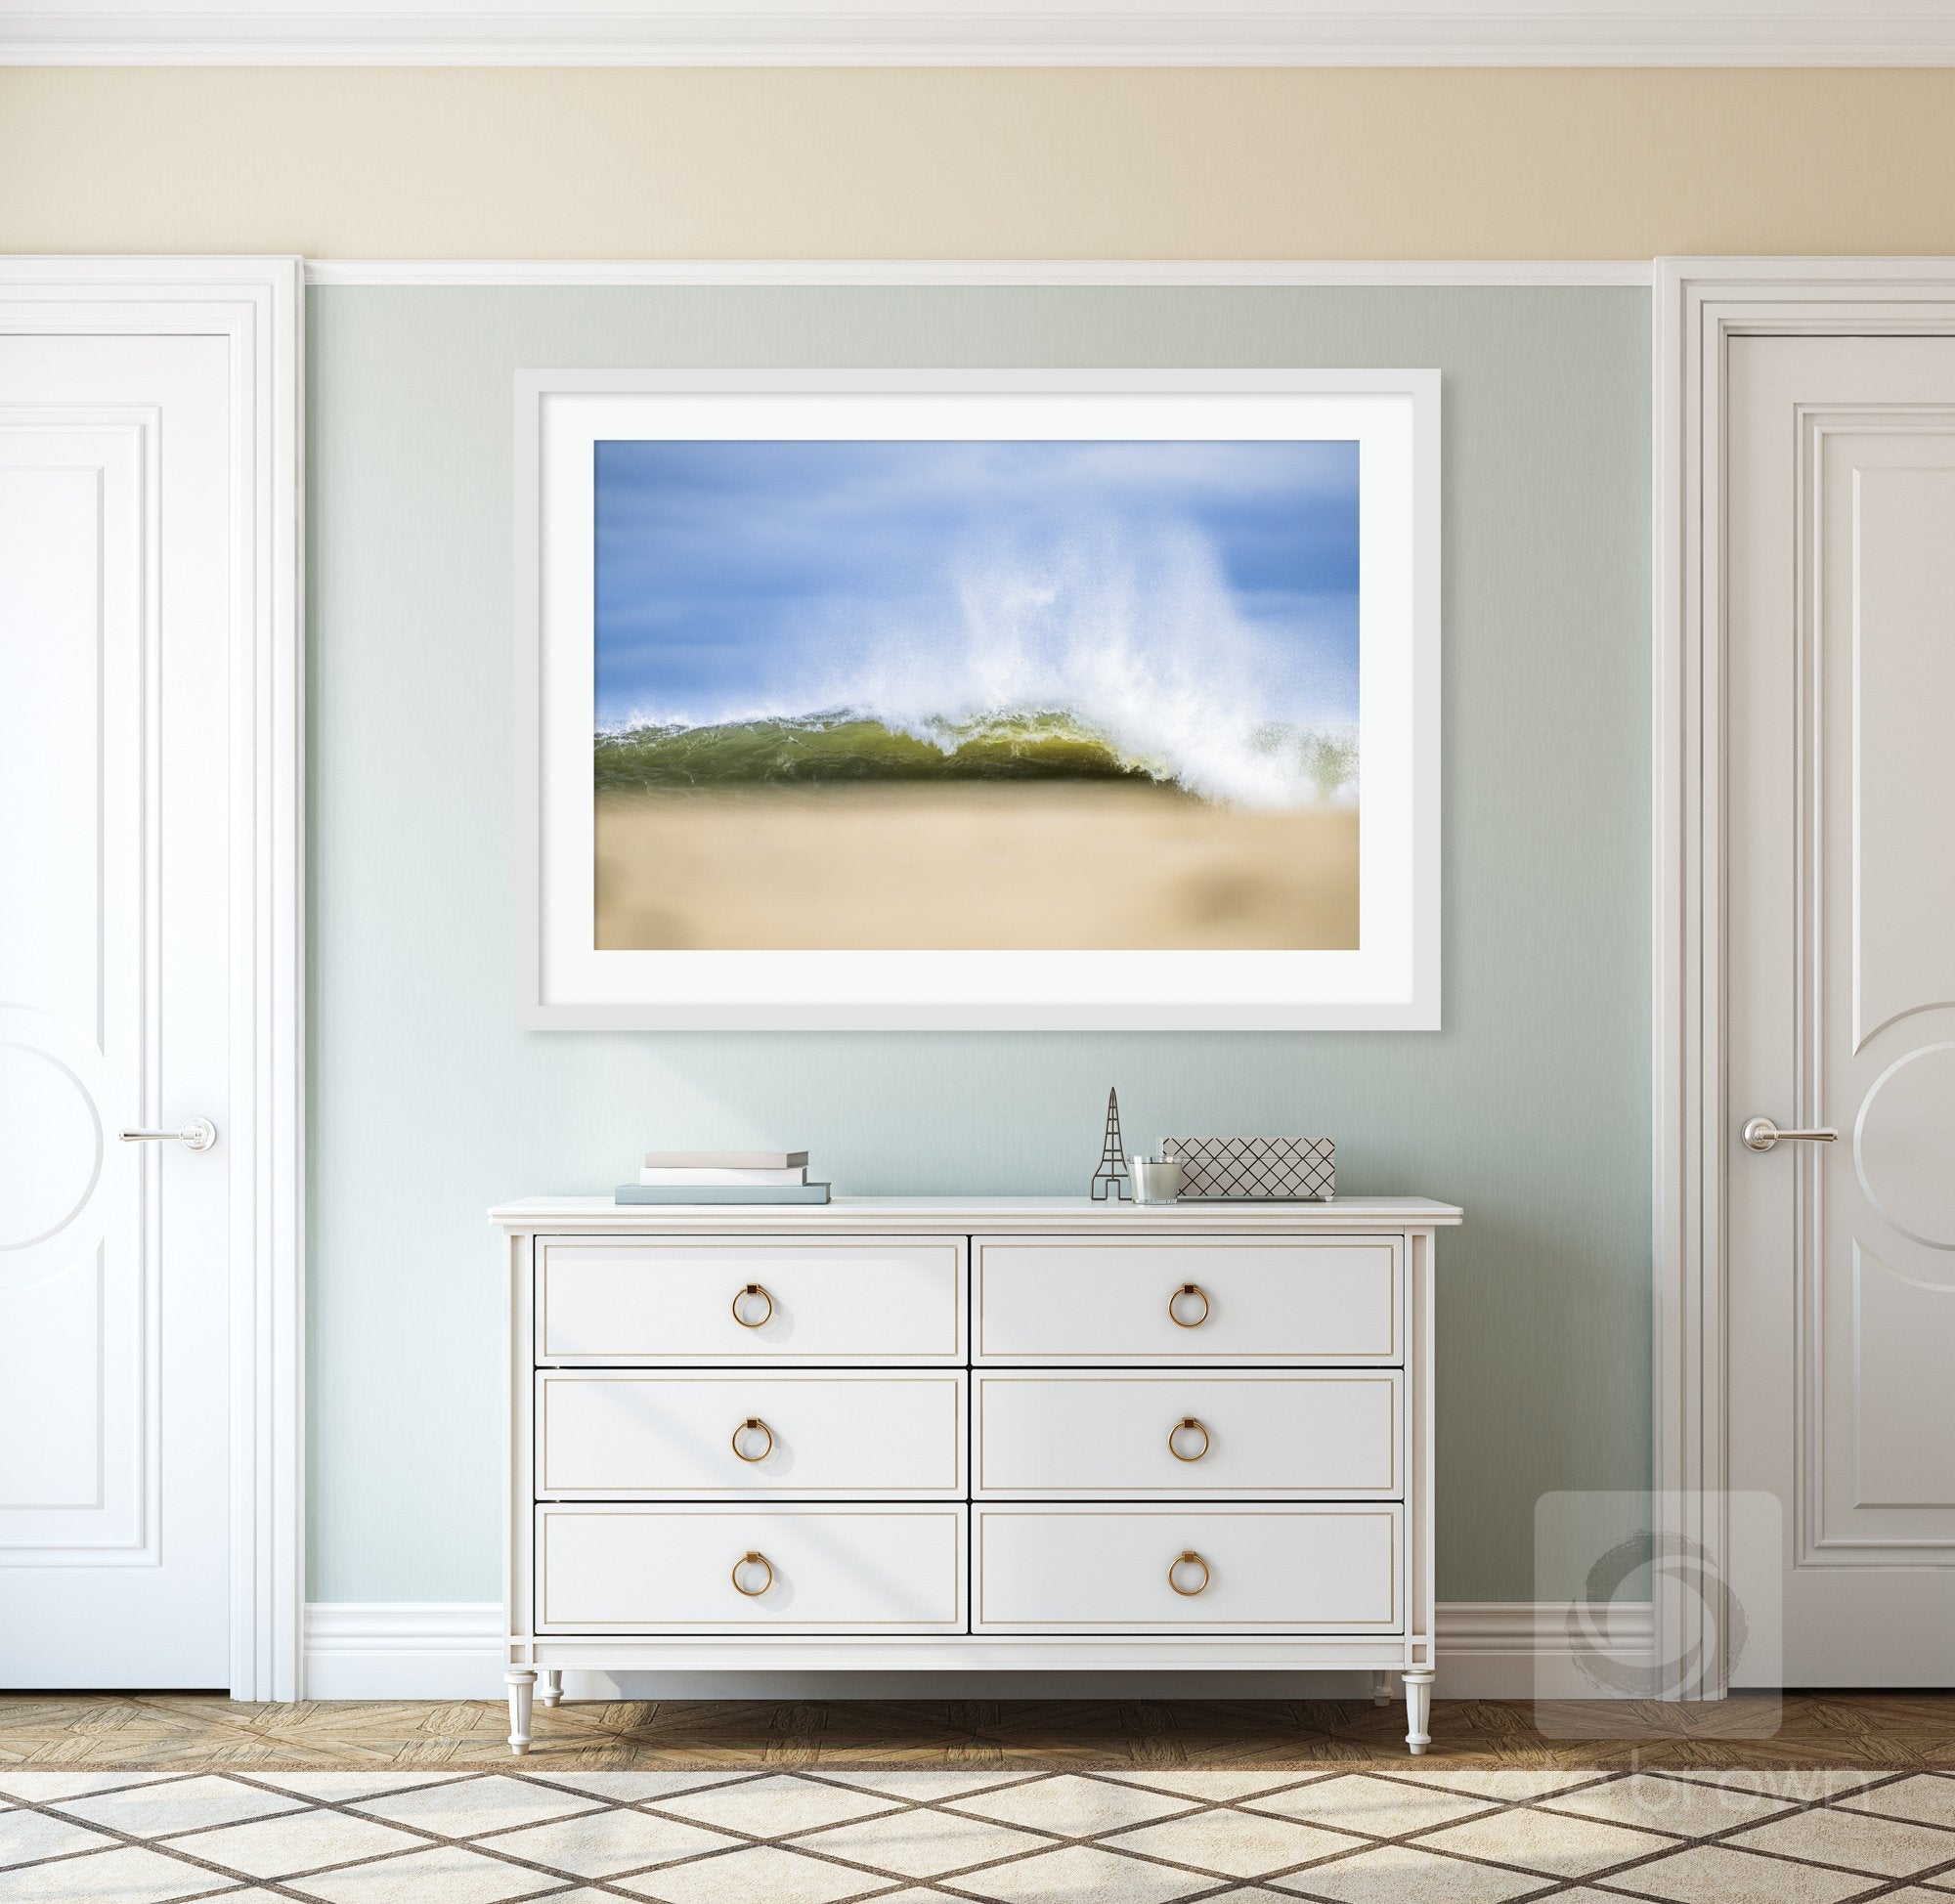 Cate Brown Photo Over the Dunes  //  Ocean Photography Made to Order Ocean Fine Art